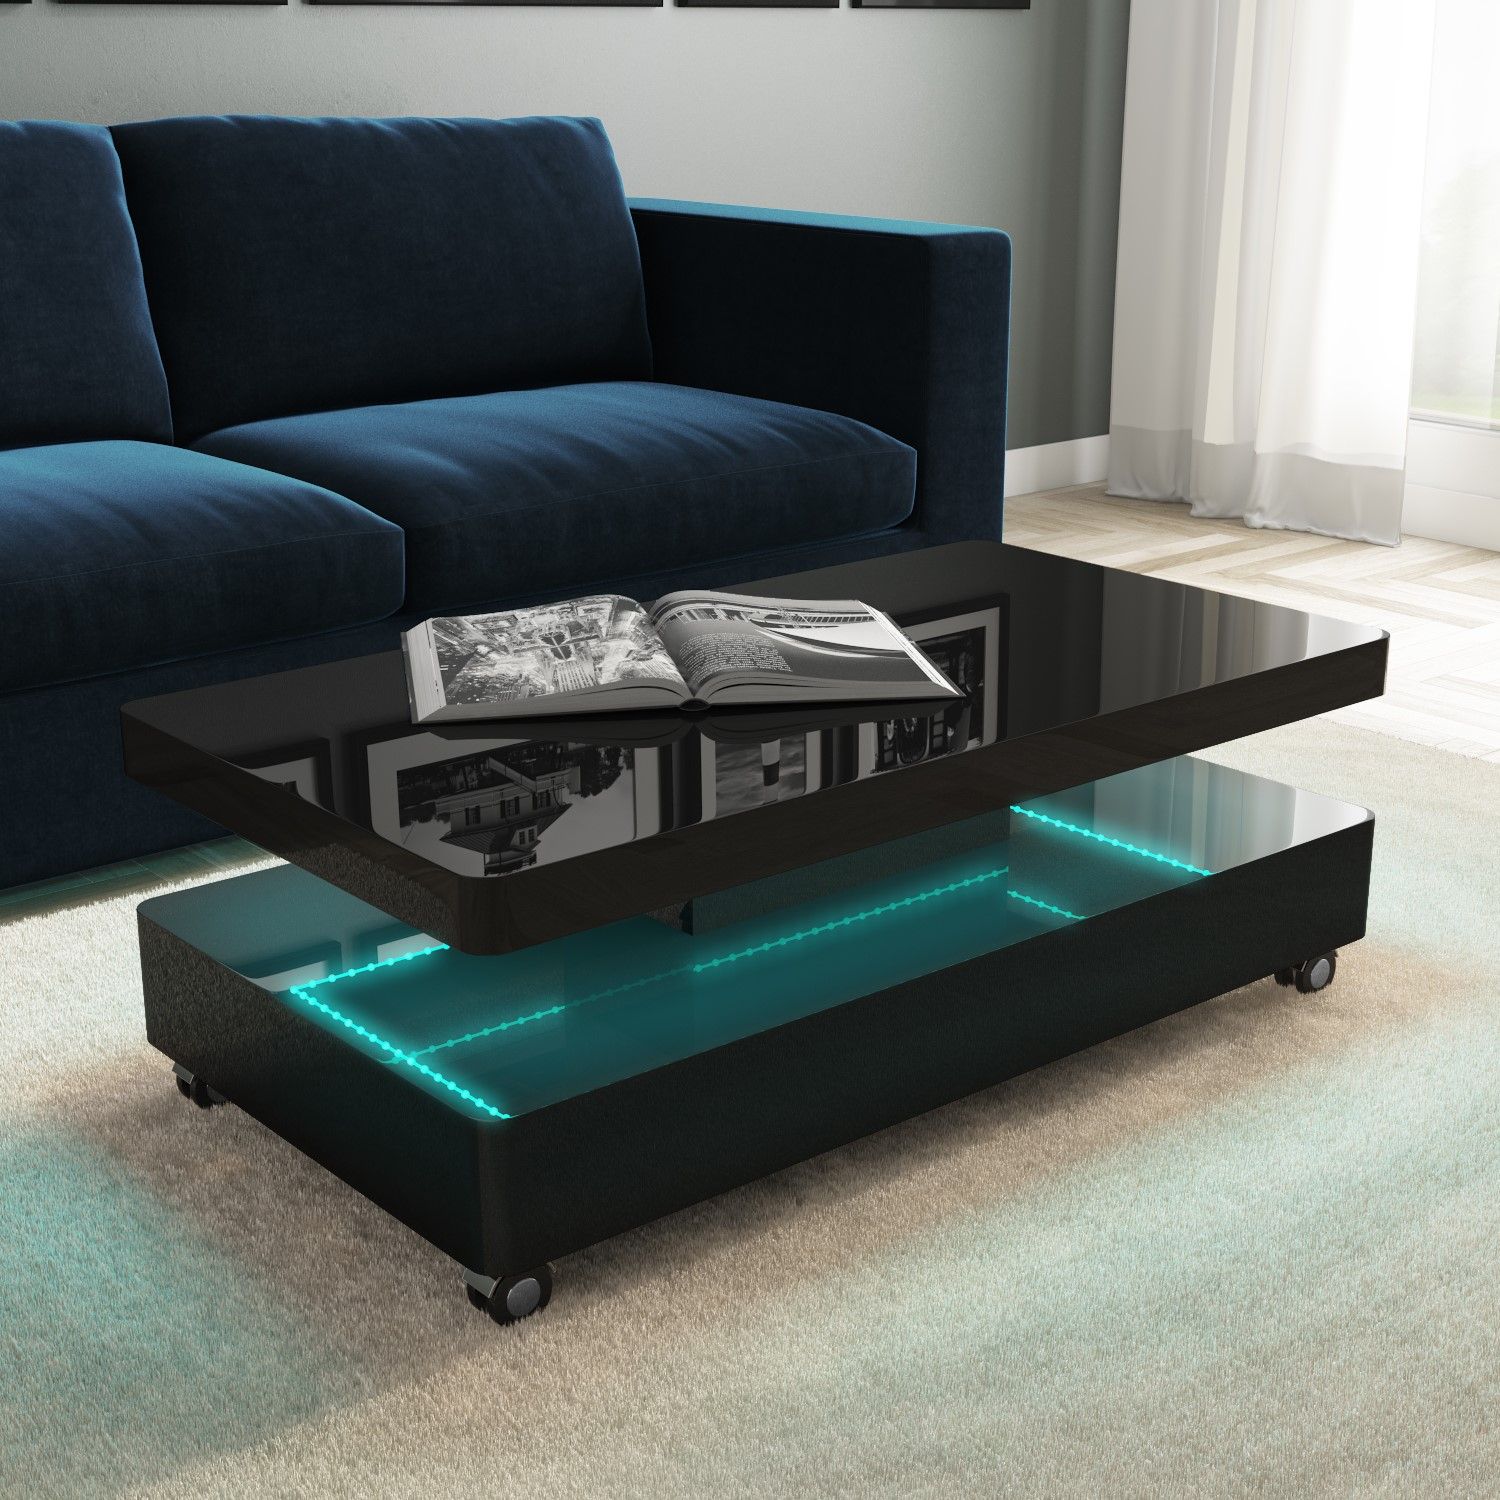 Tiffany Black High Gloss Rectangular Coffee Table With Led Lighting Intended For High Gloss Black Coffee Tables (View 2 of 15)